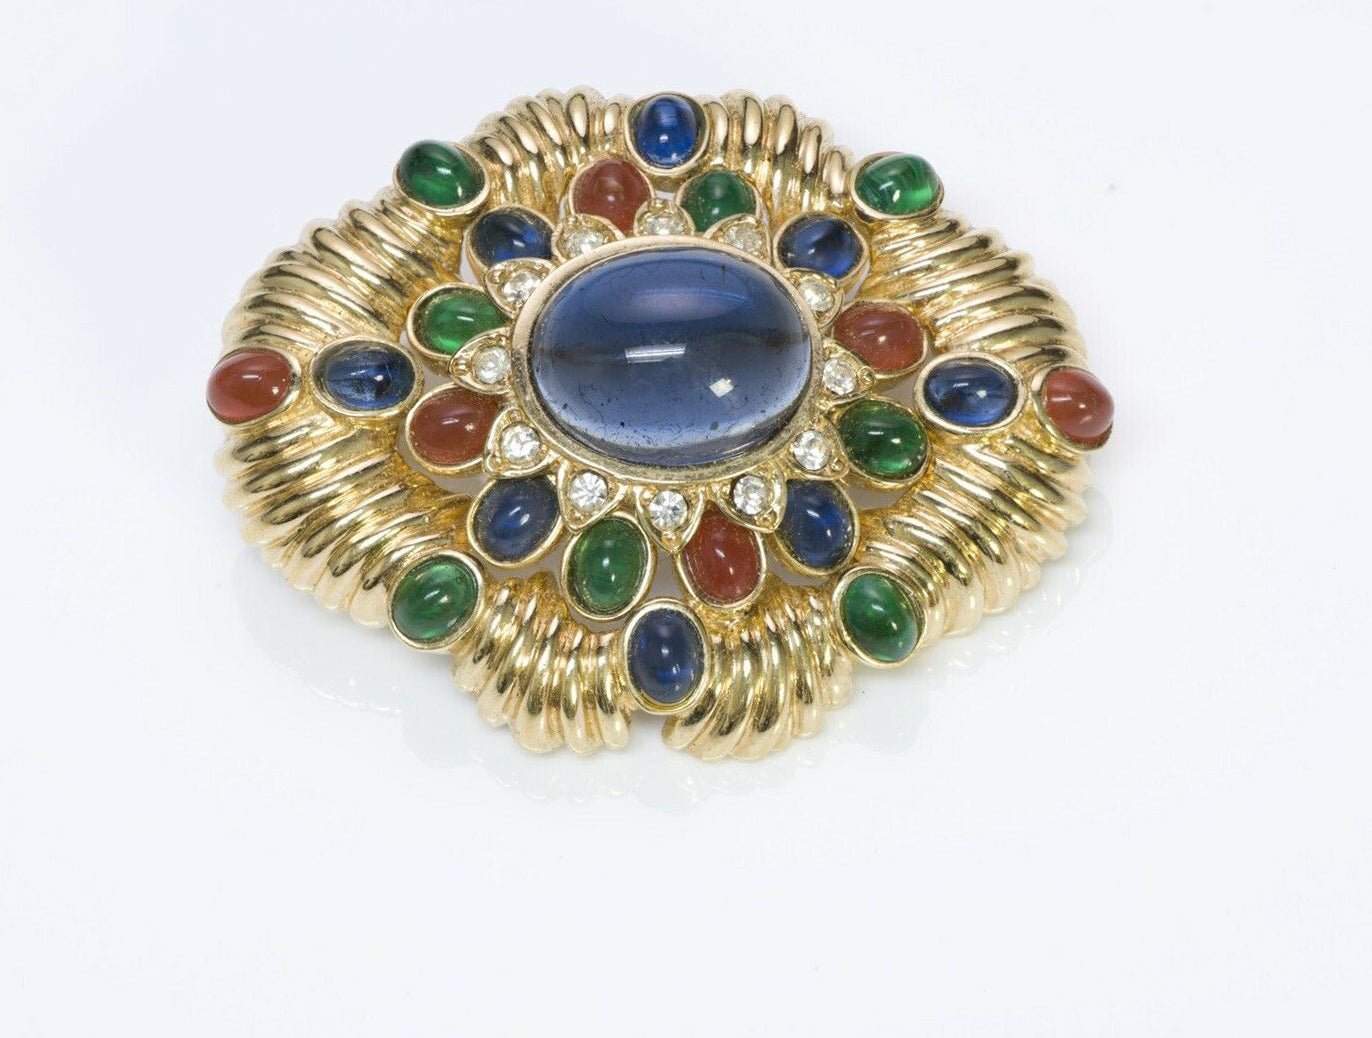 CINER Jewels of India Blue Red Green Cabochon Glass Pendant Brooch